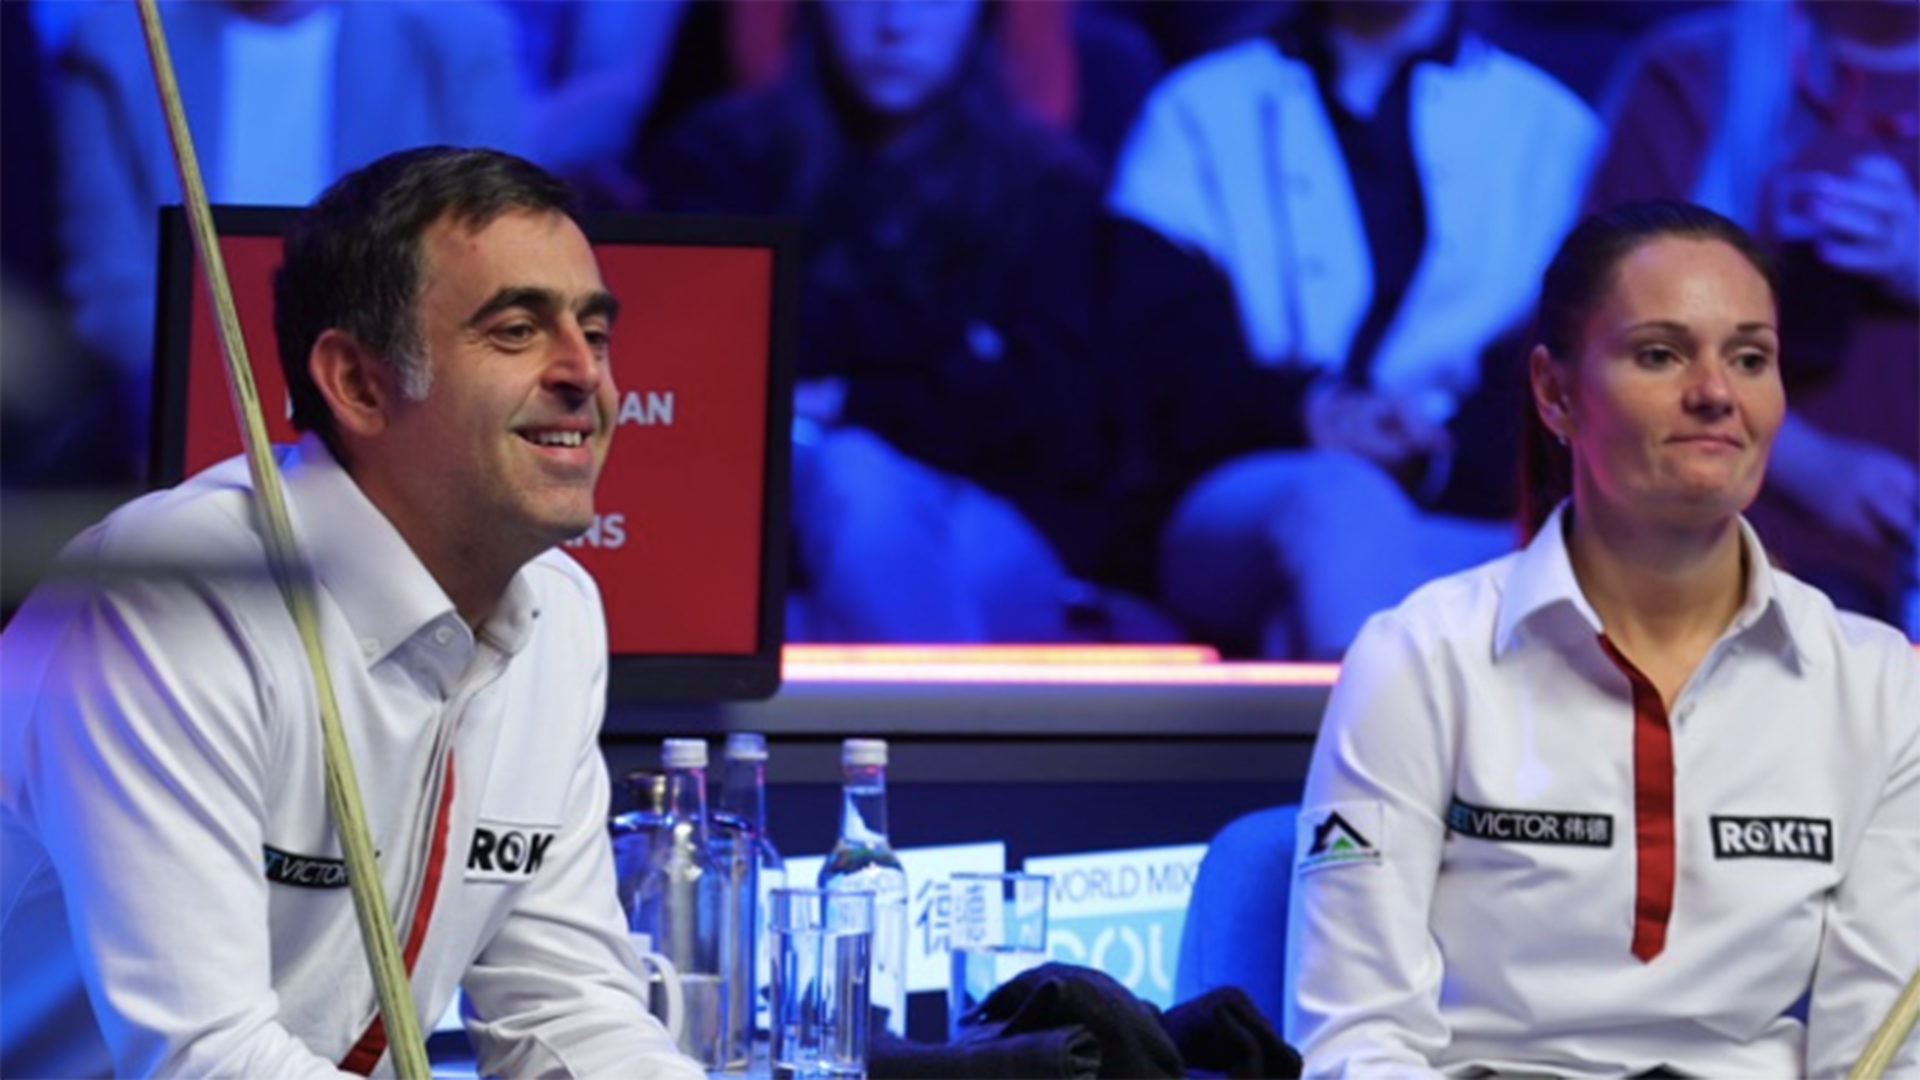 Snooker results Latest news and scores from the World Mixed Doubles